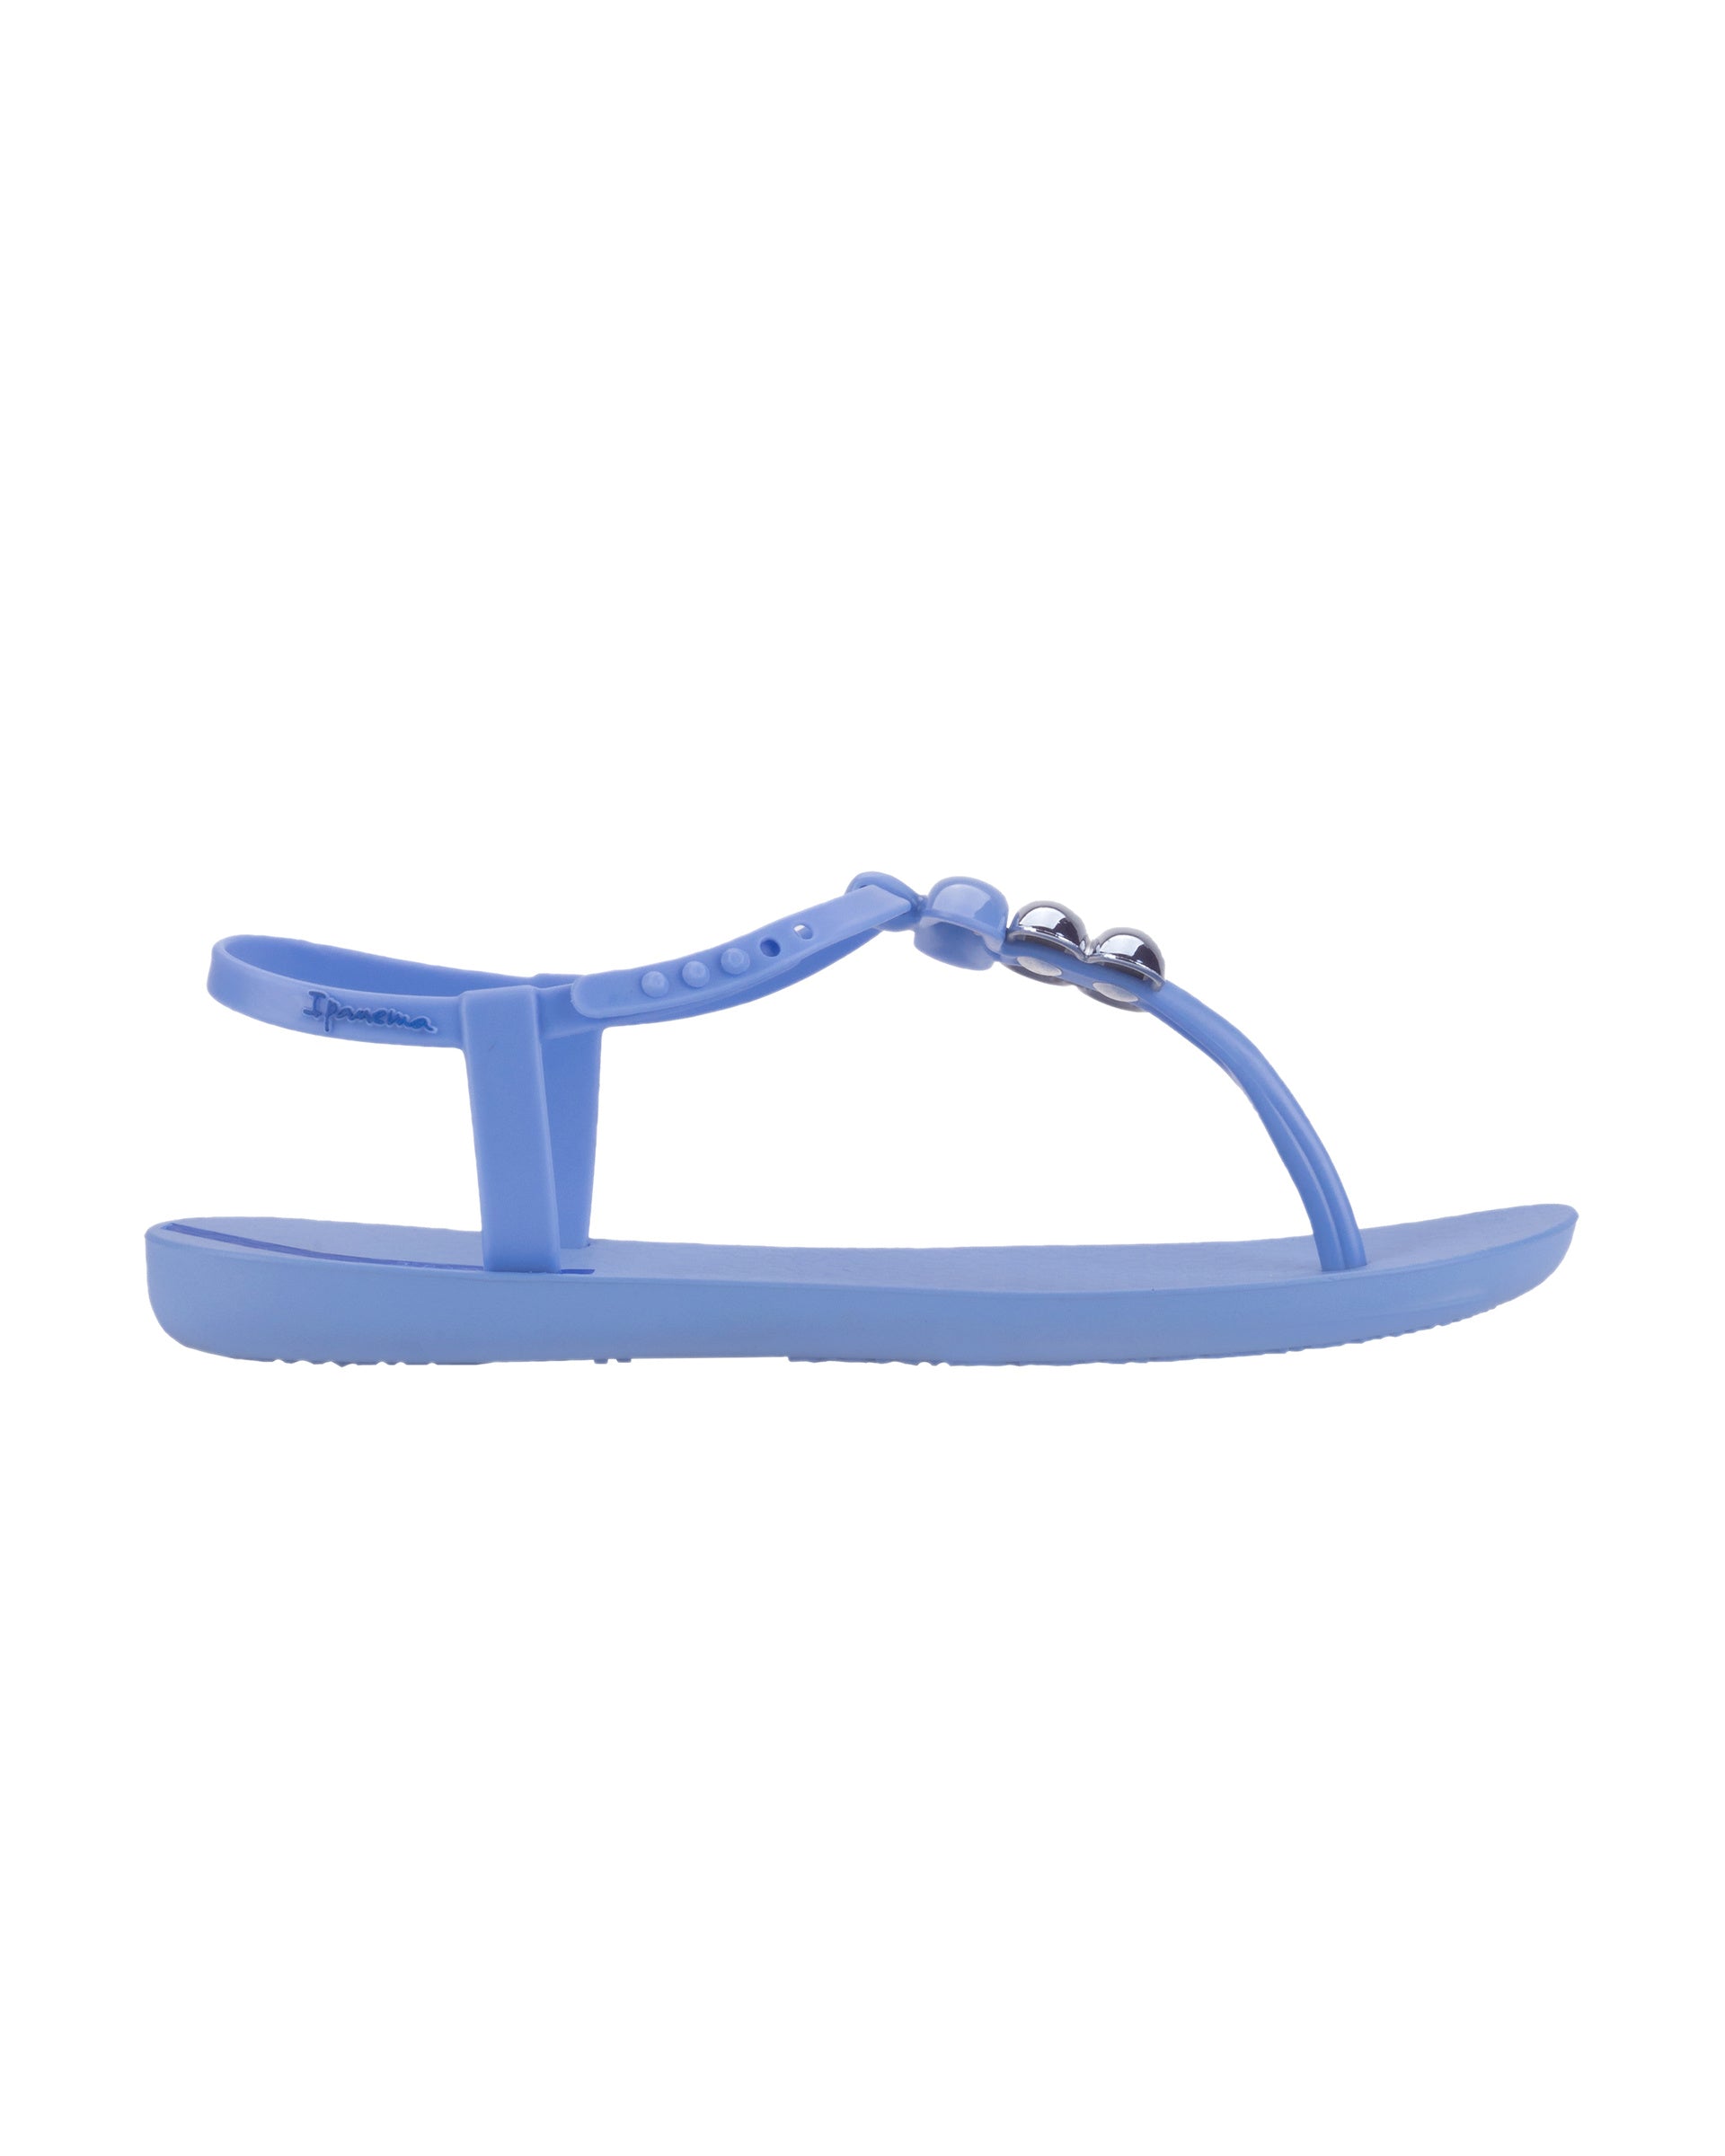 Outer side view of a blue Ipanema Class women's sandal with 3 bubble baubles on the t-strap.